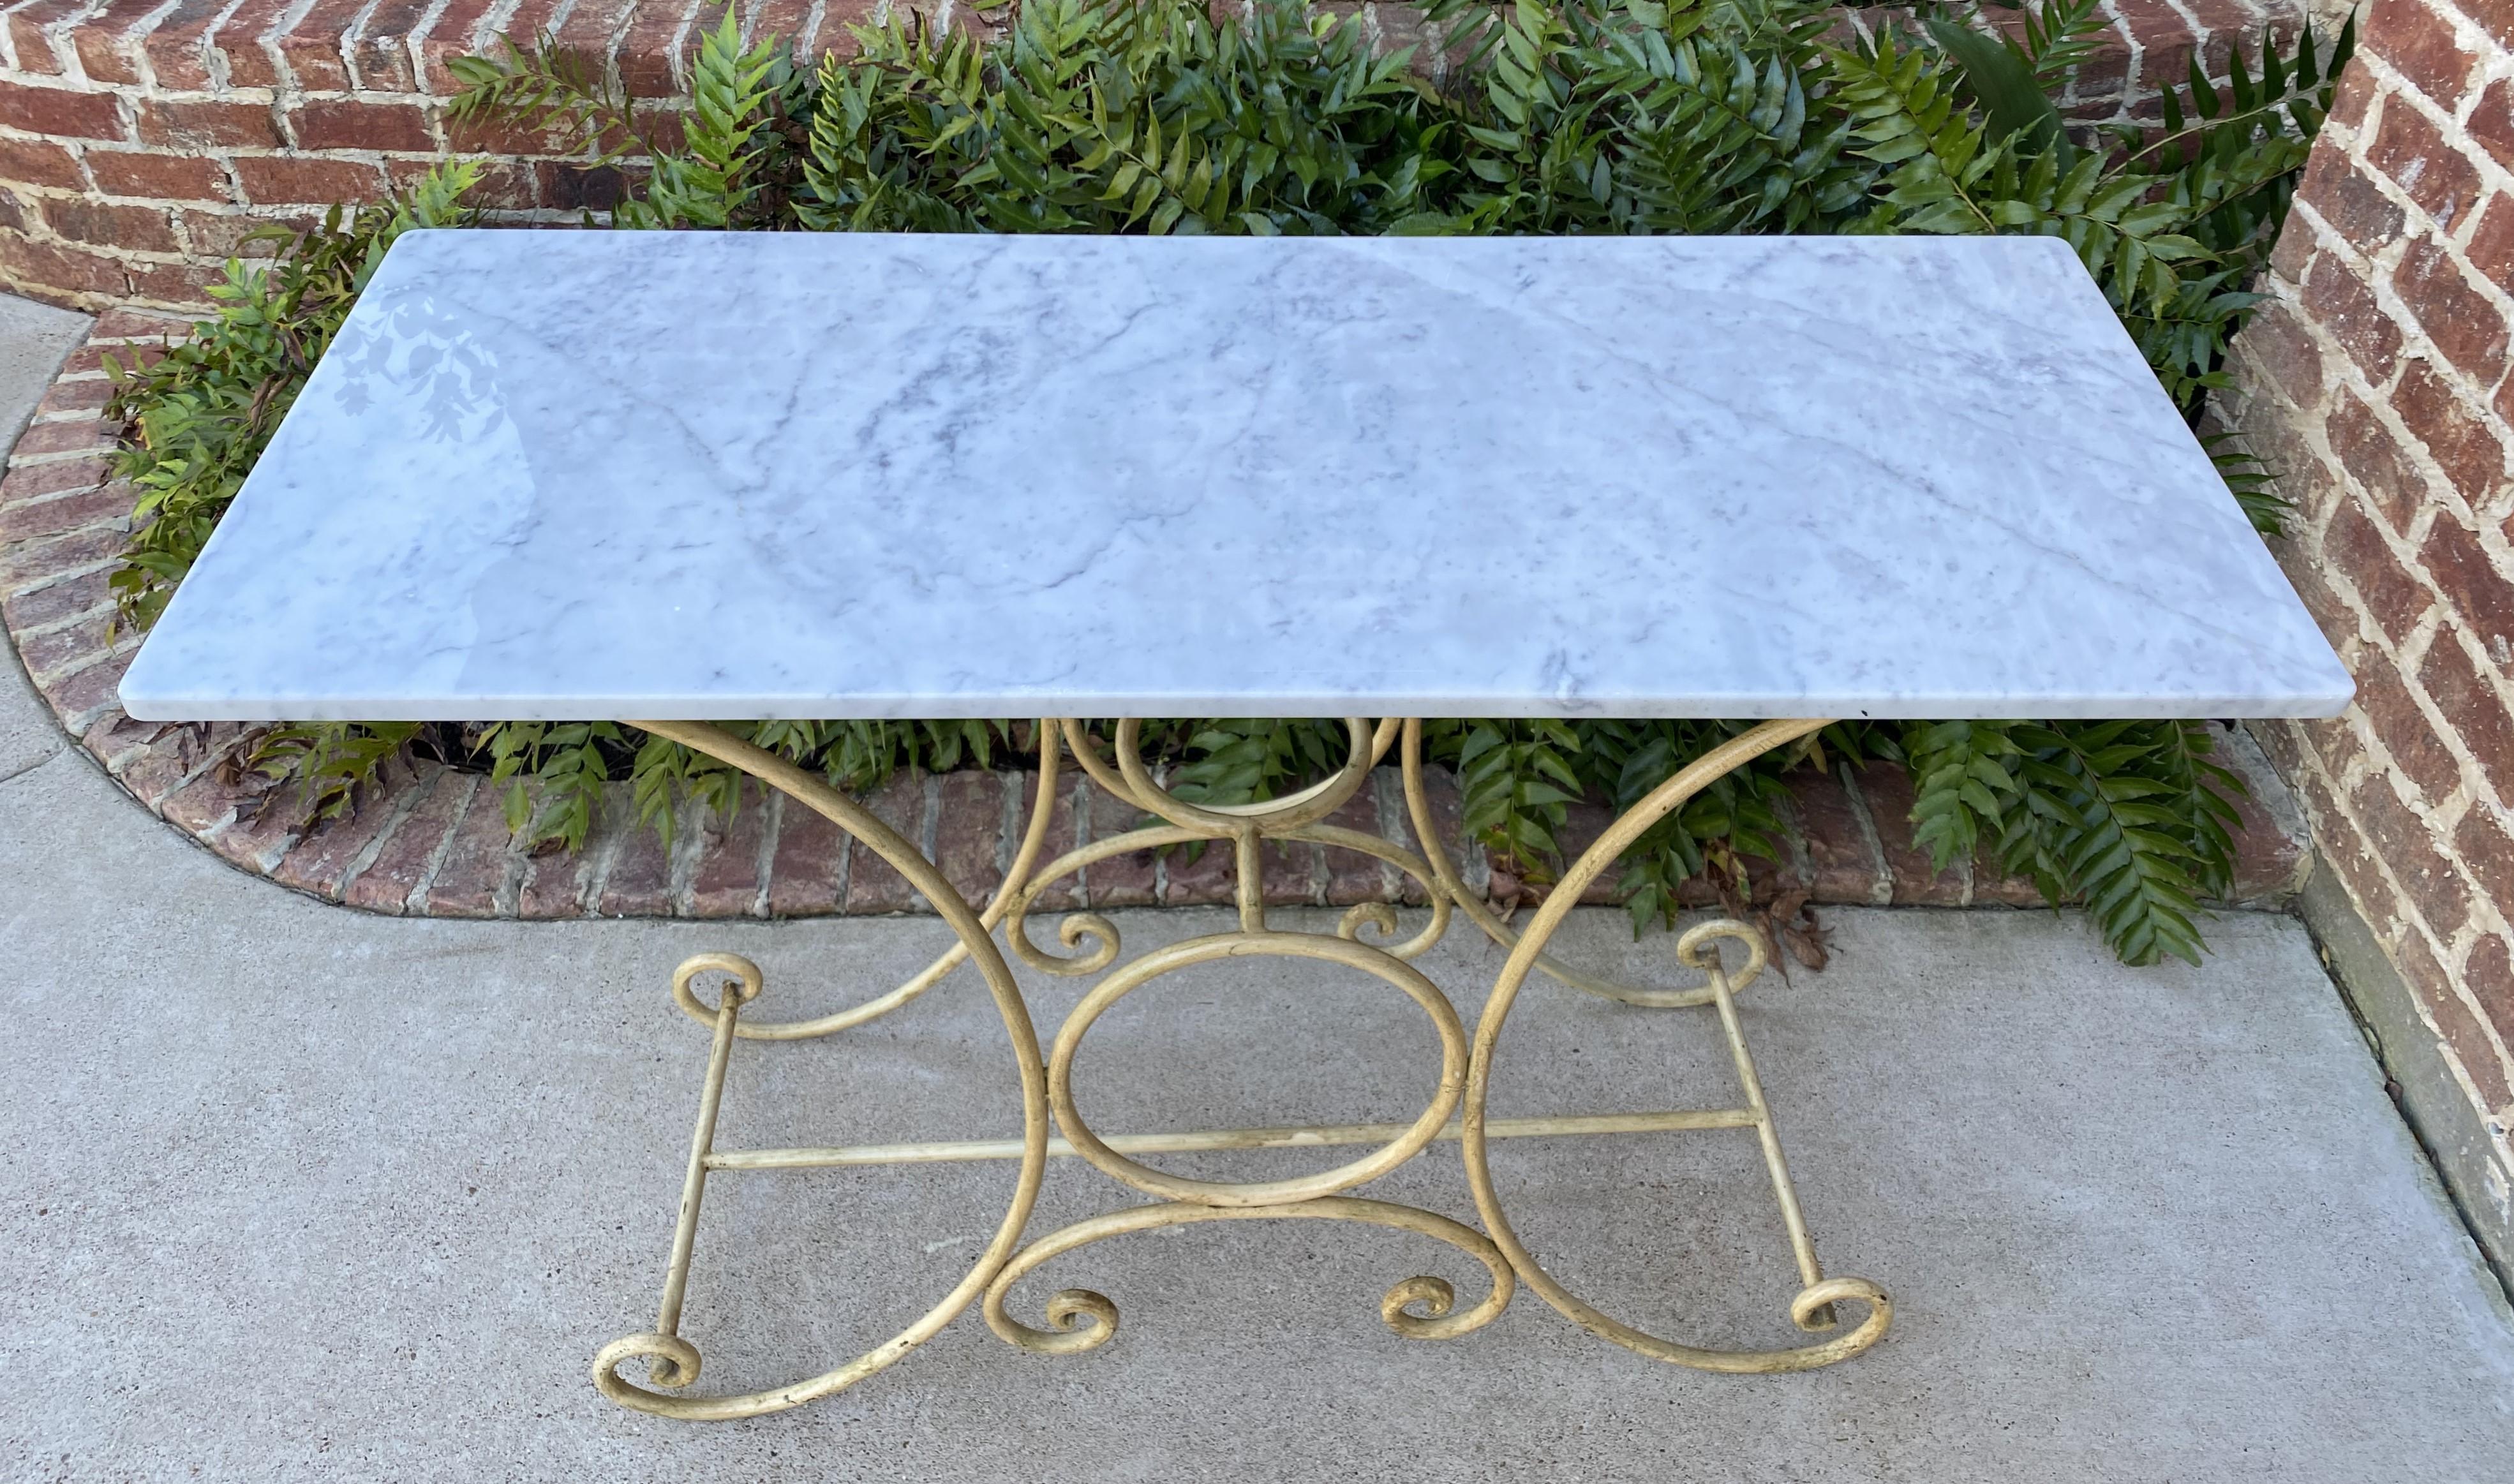 Antique French Country Baker's table pastry table~~Polished Carrara marble top and scrolled iron base

These tables were originally used by bakeries for kneading bread and pastries~~so hard to find this in condition

This beautiful table has the